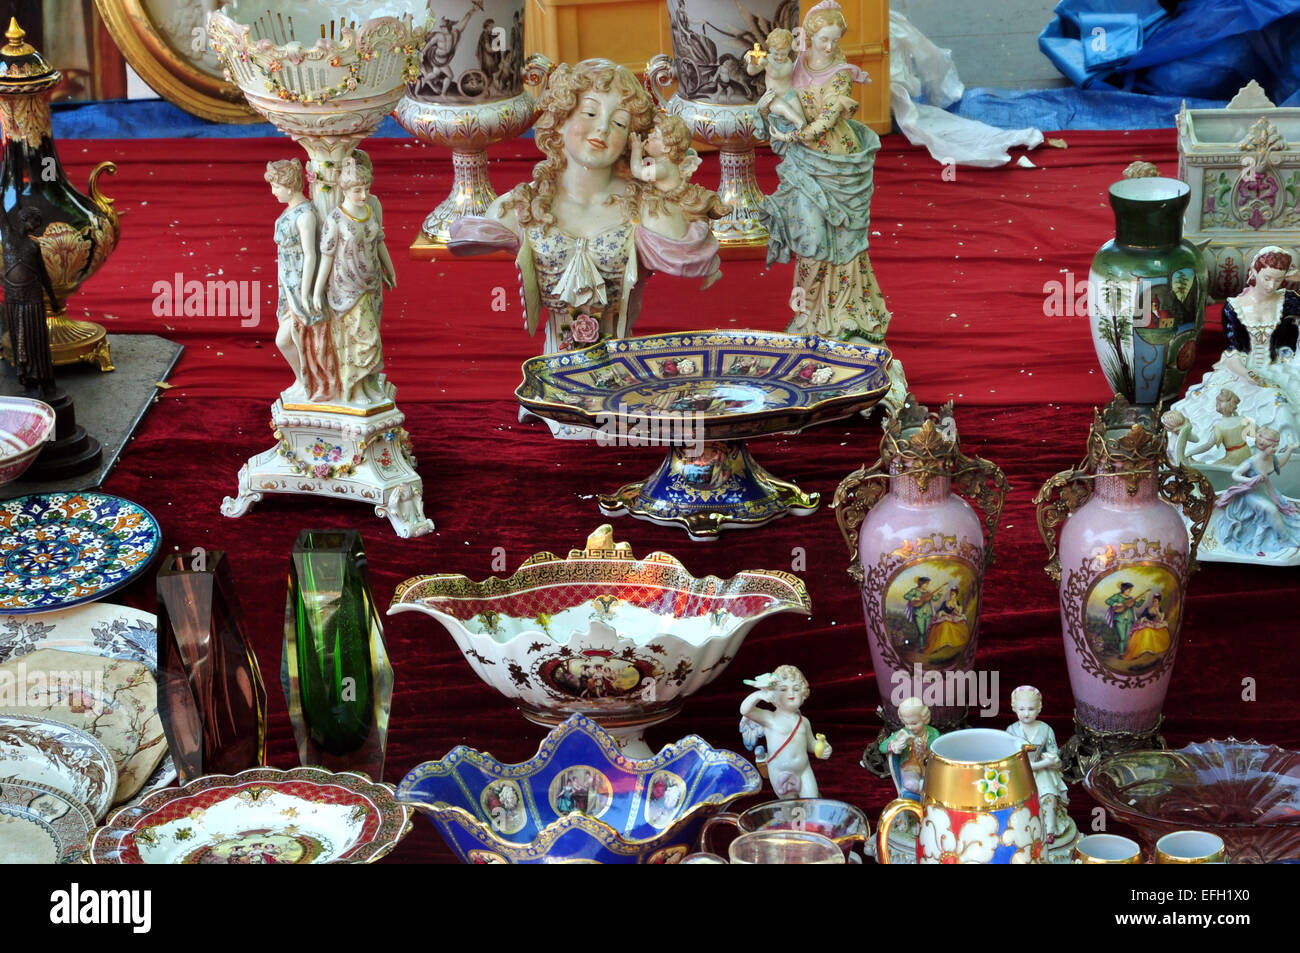 Porcelain vases statuettes and plates antique decorative objects background. Stock Photo